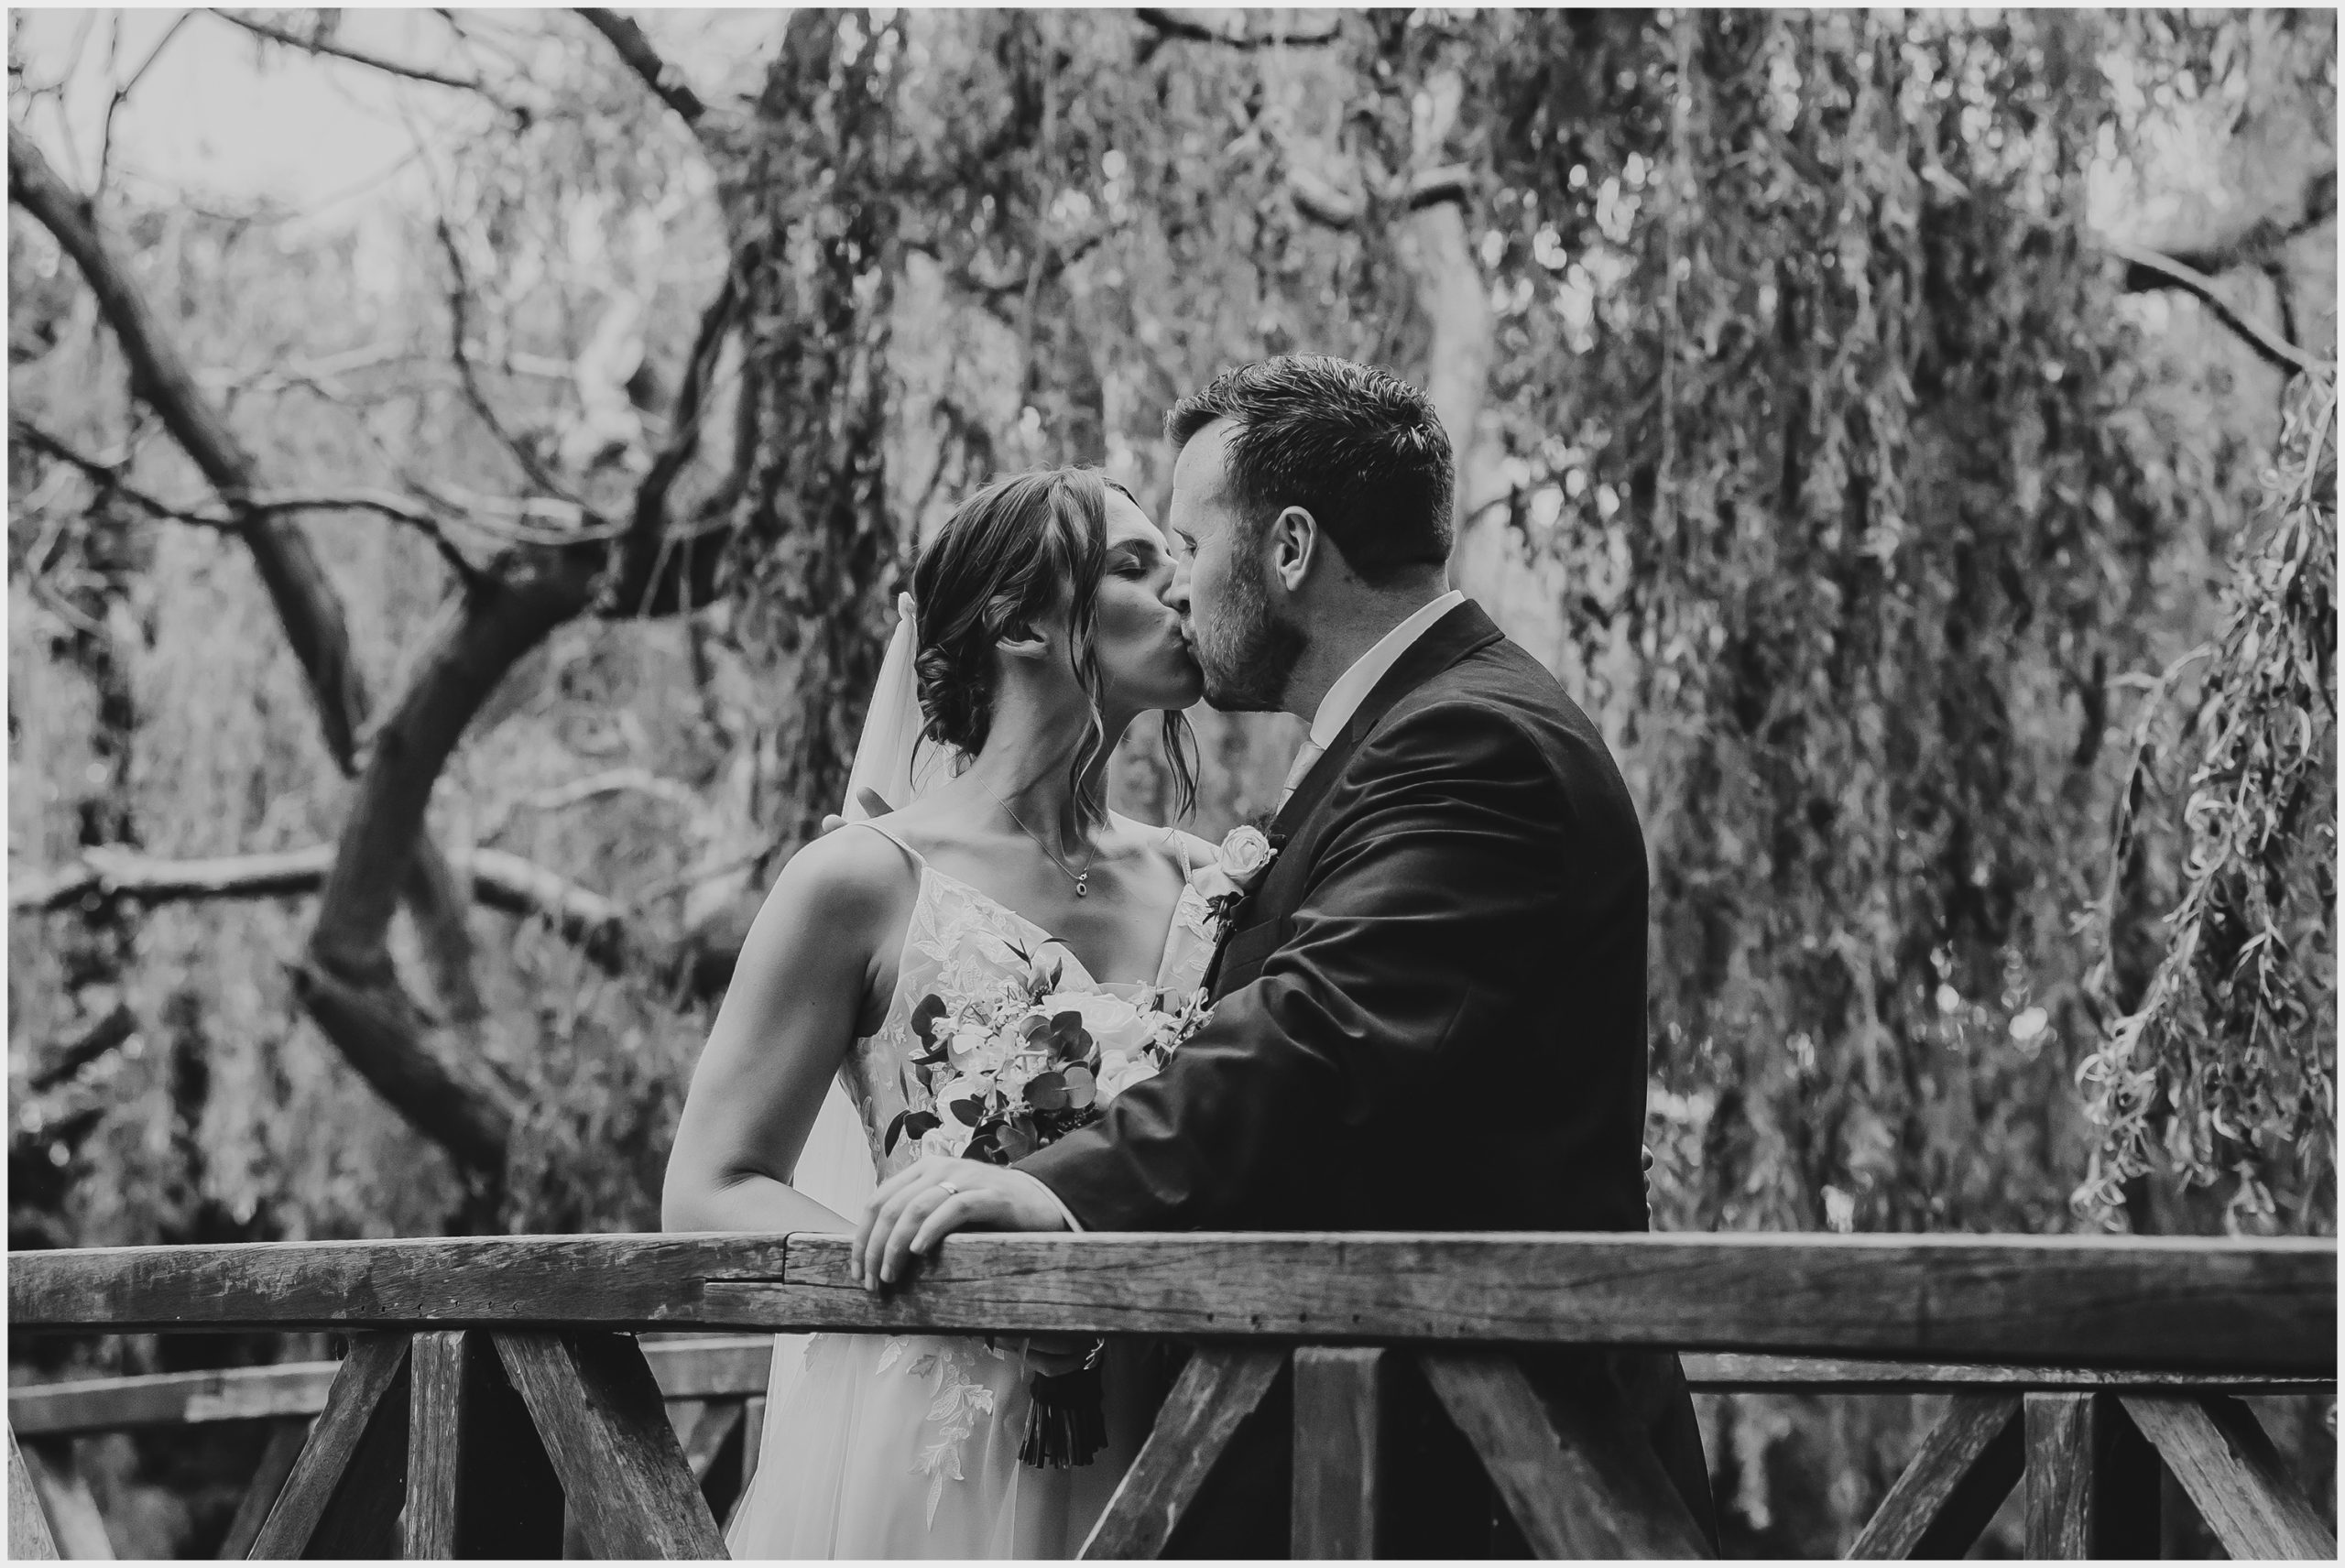 A beautiful bride and groom kiss on a bridge with lush willow trees in the background.  Image captured by Helena Jayne Photography a wedding photographer based in north Wales